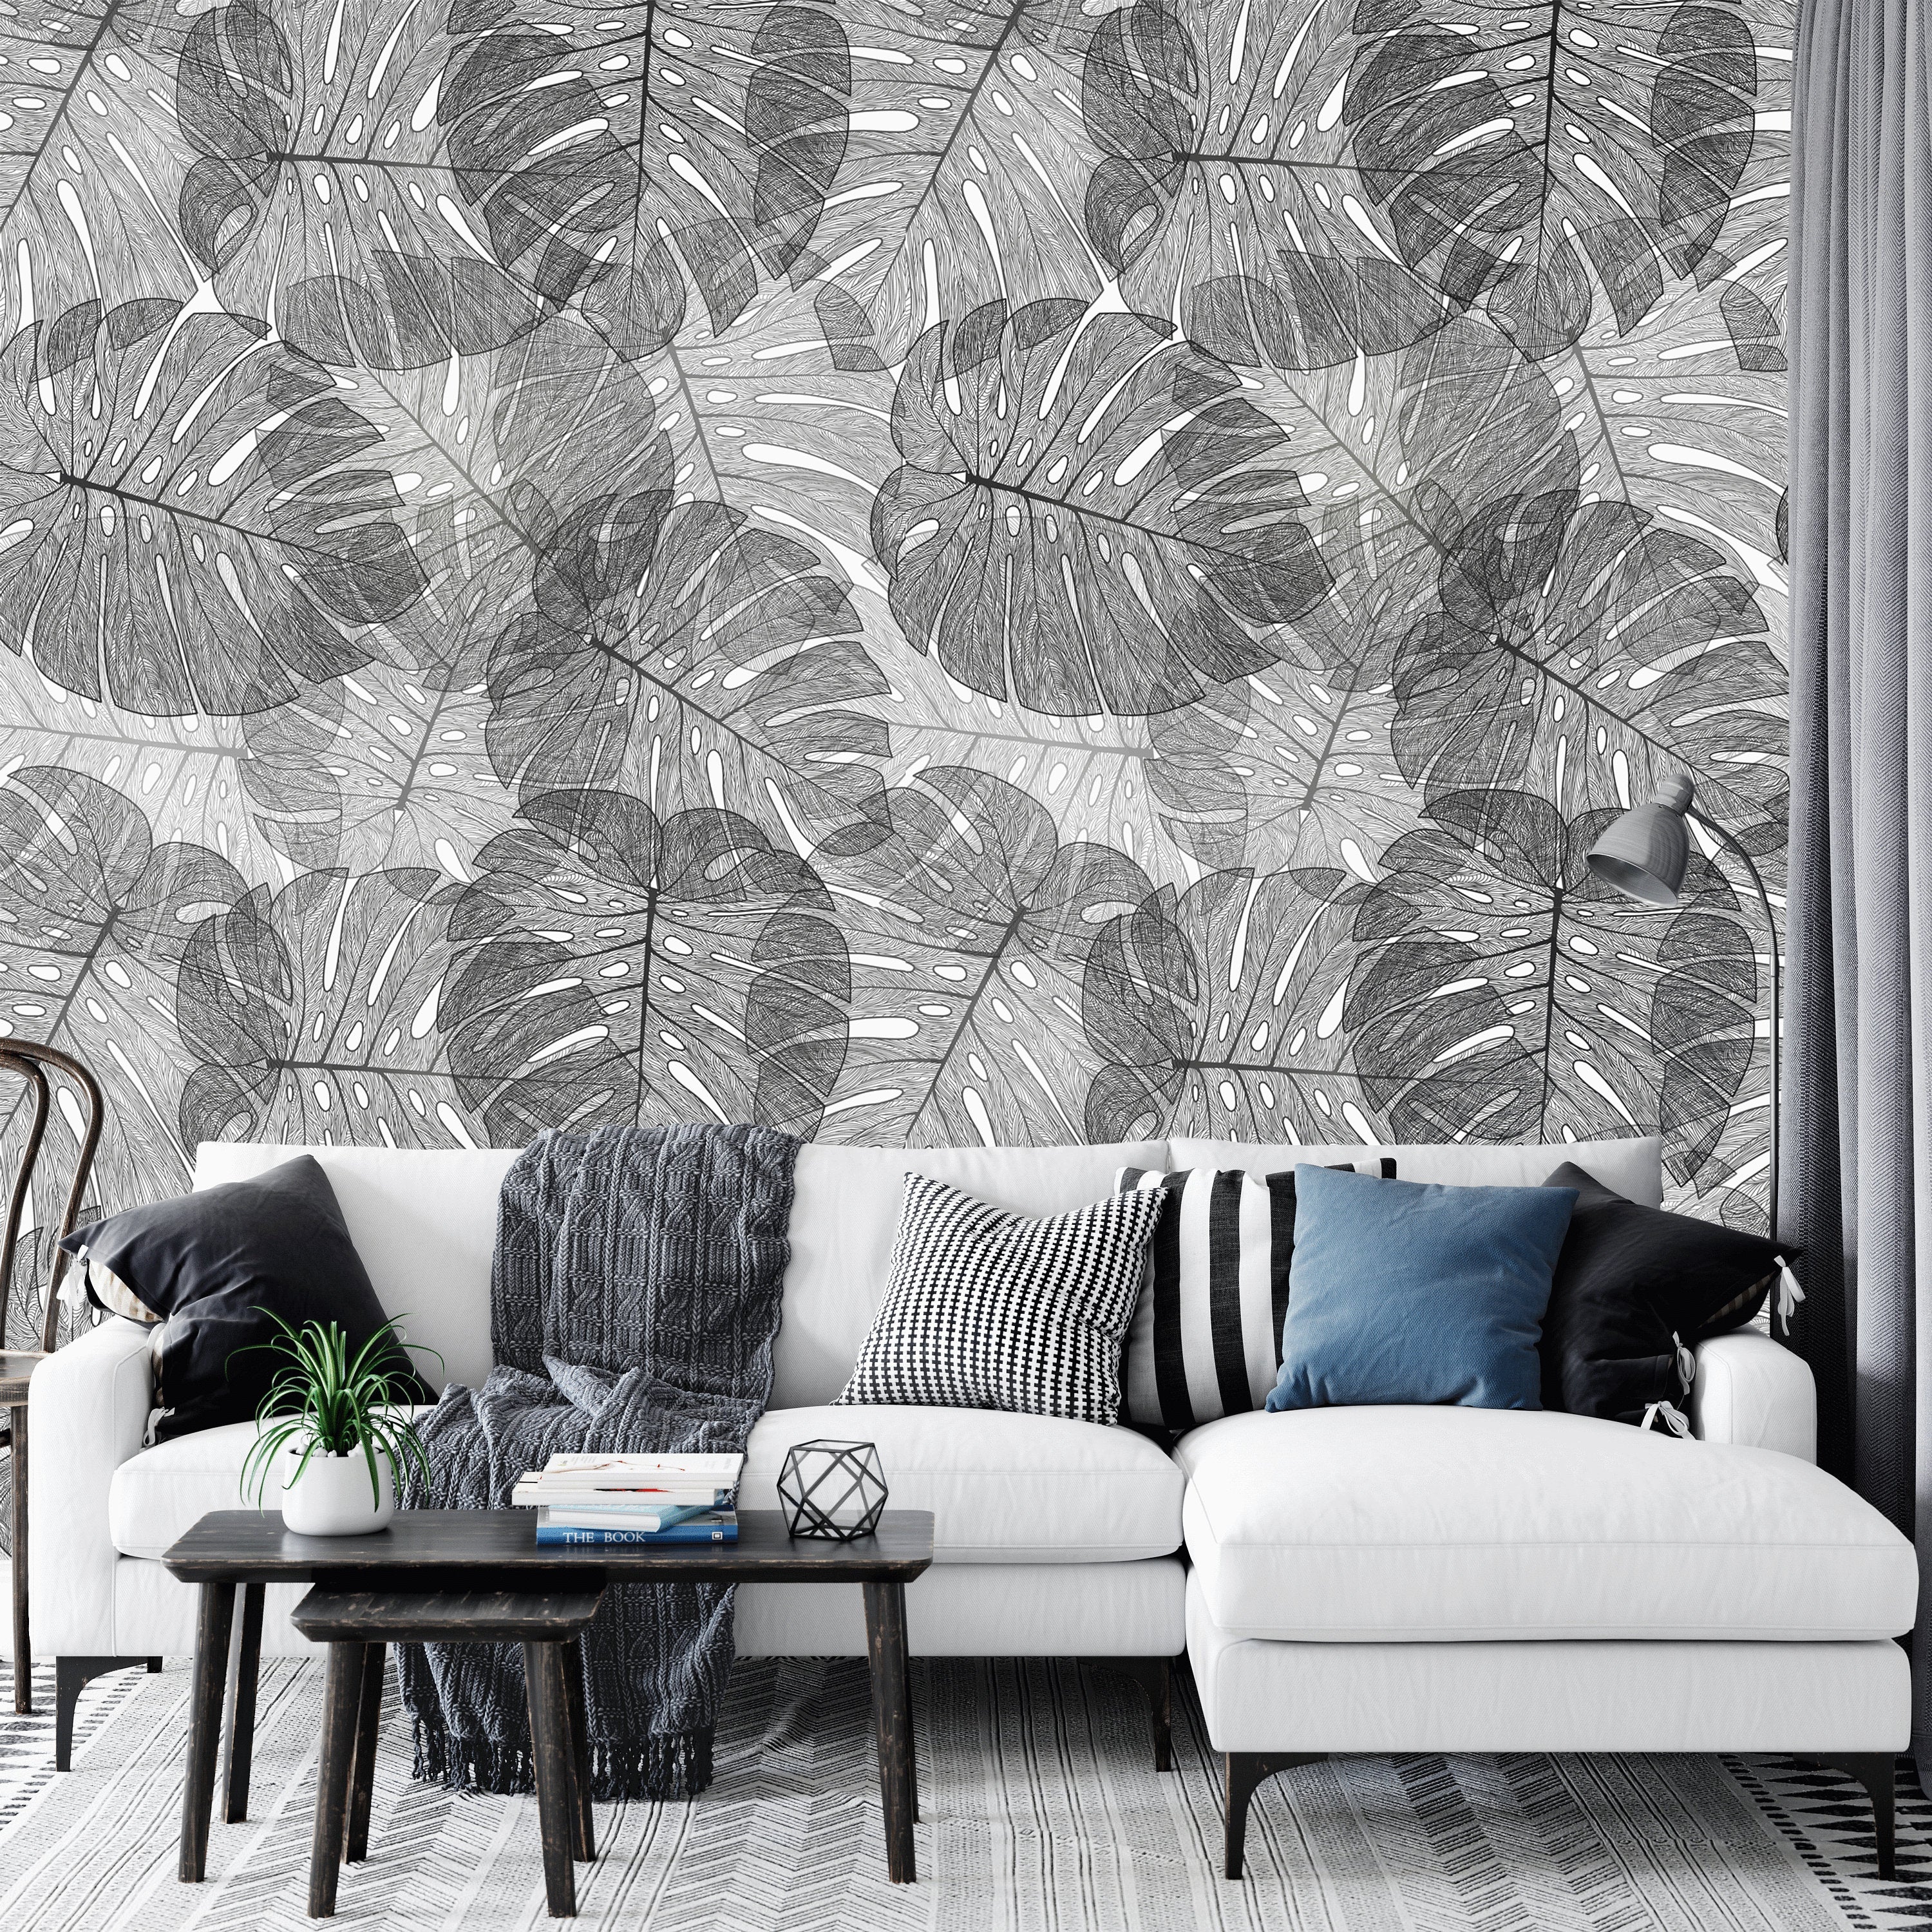 Monochrome Black And White Tropical Palm Leaves Wallpaper